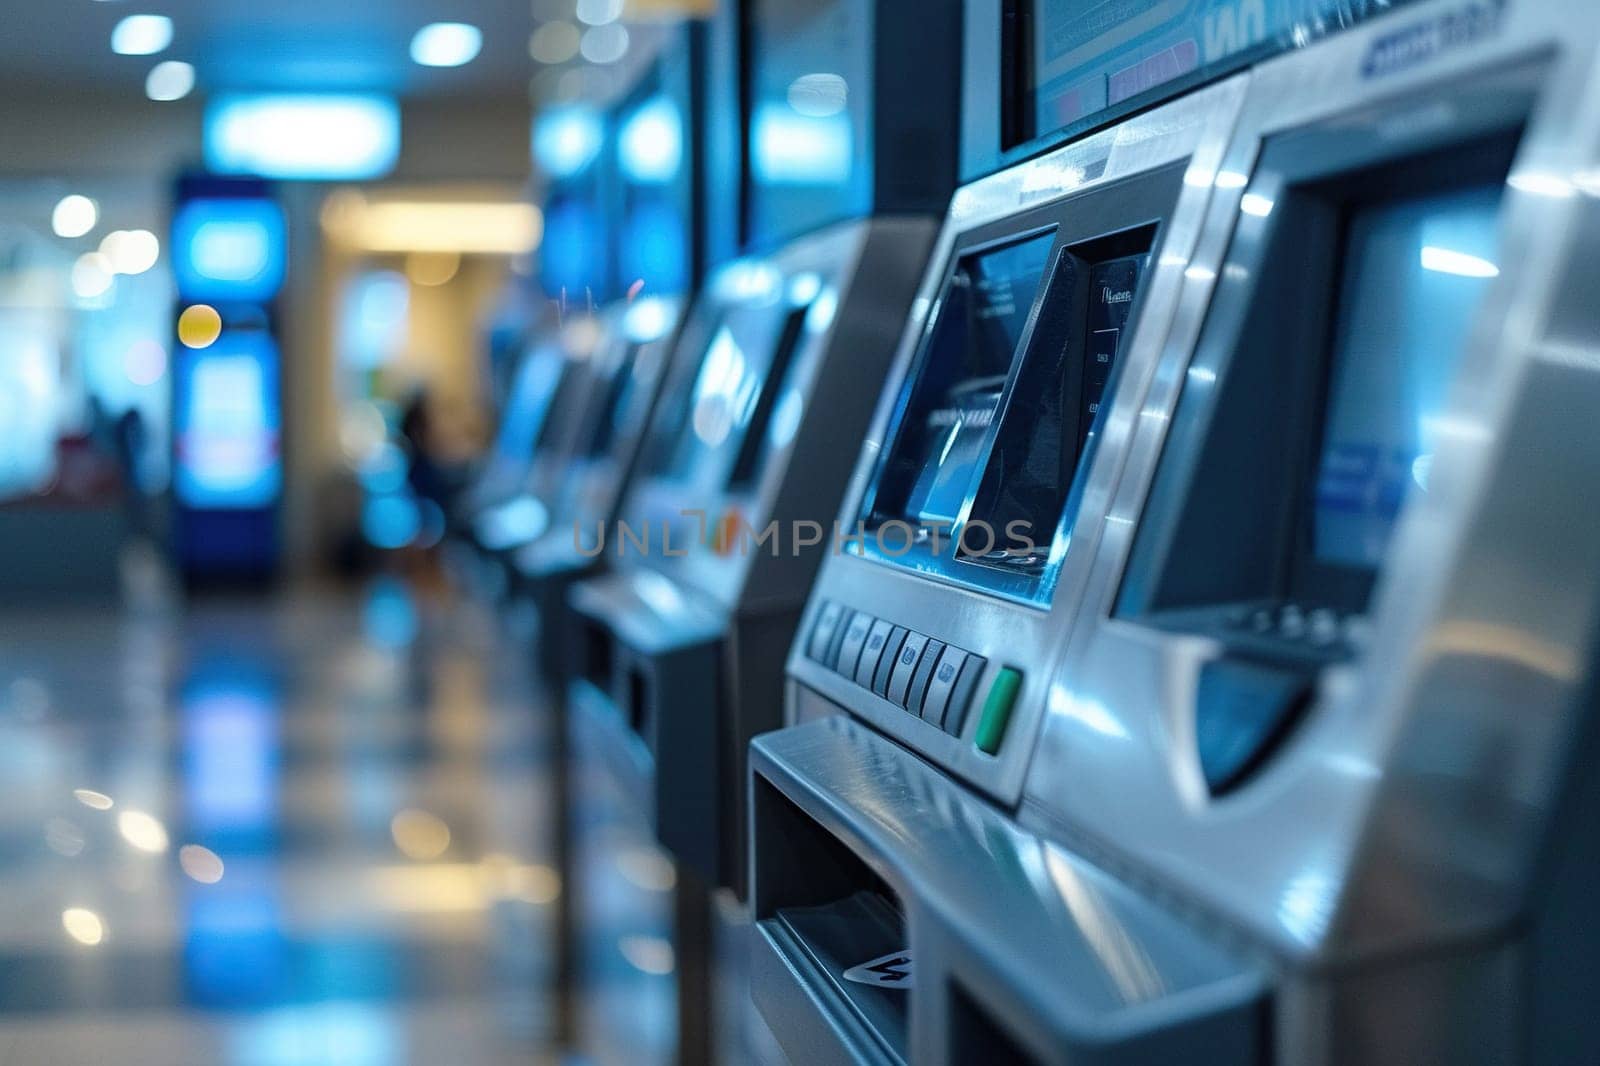 A row of ATMs in a station or airport building.